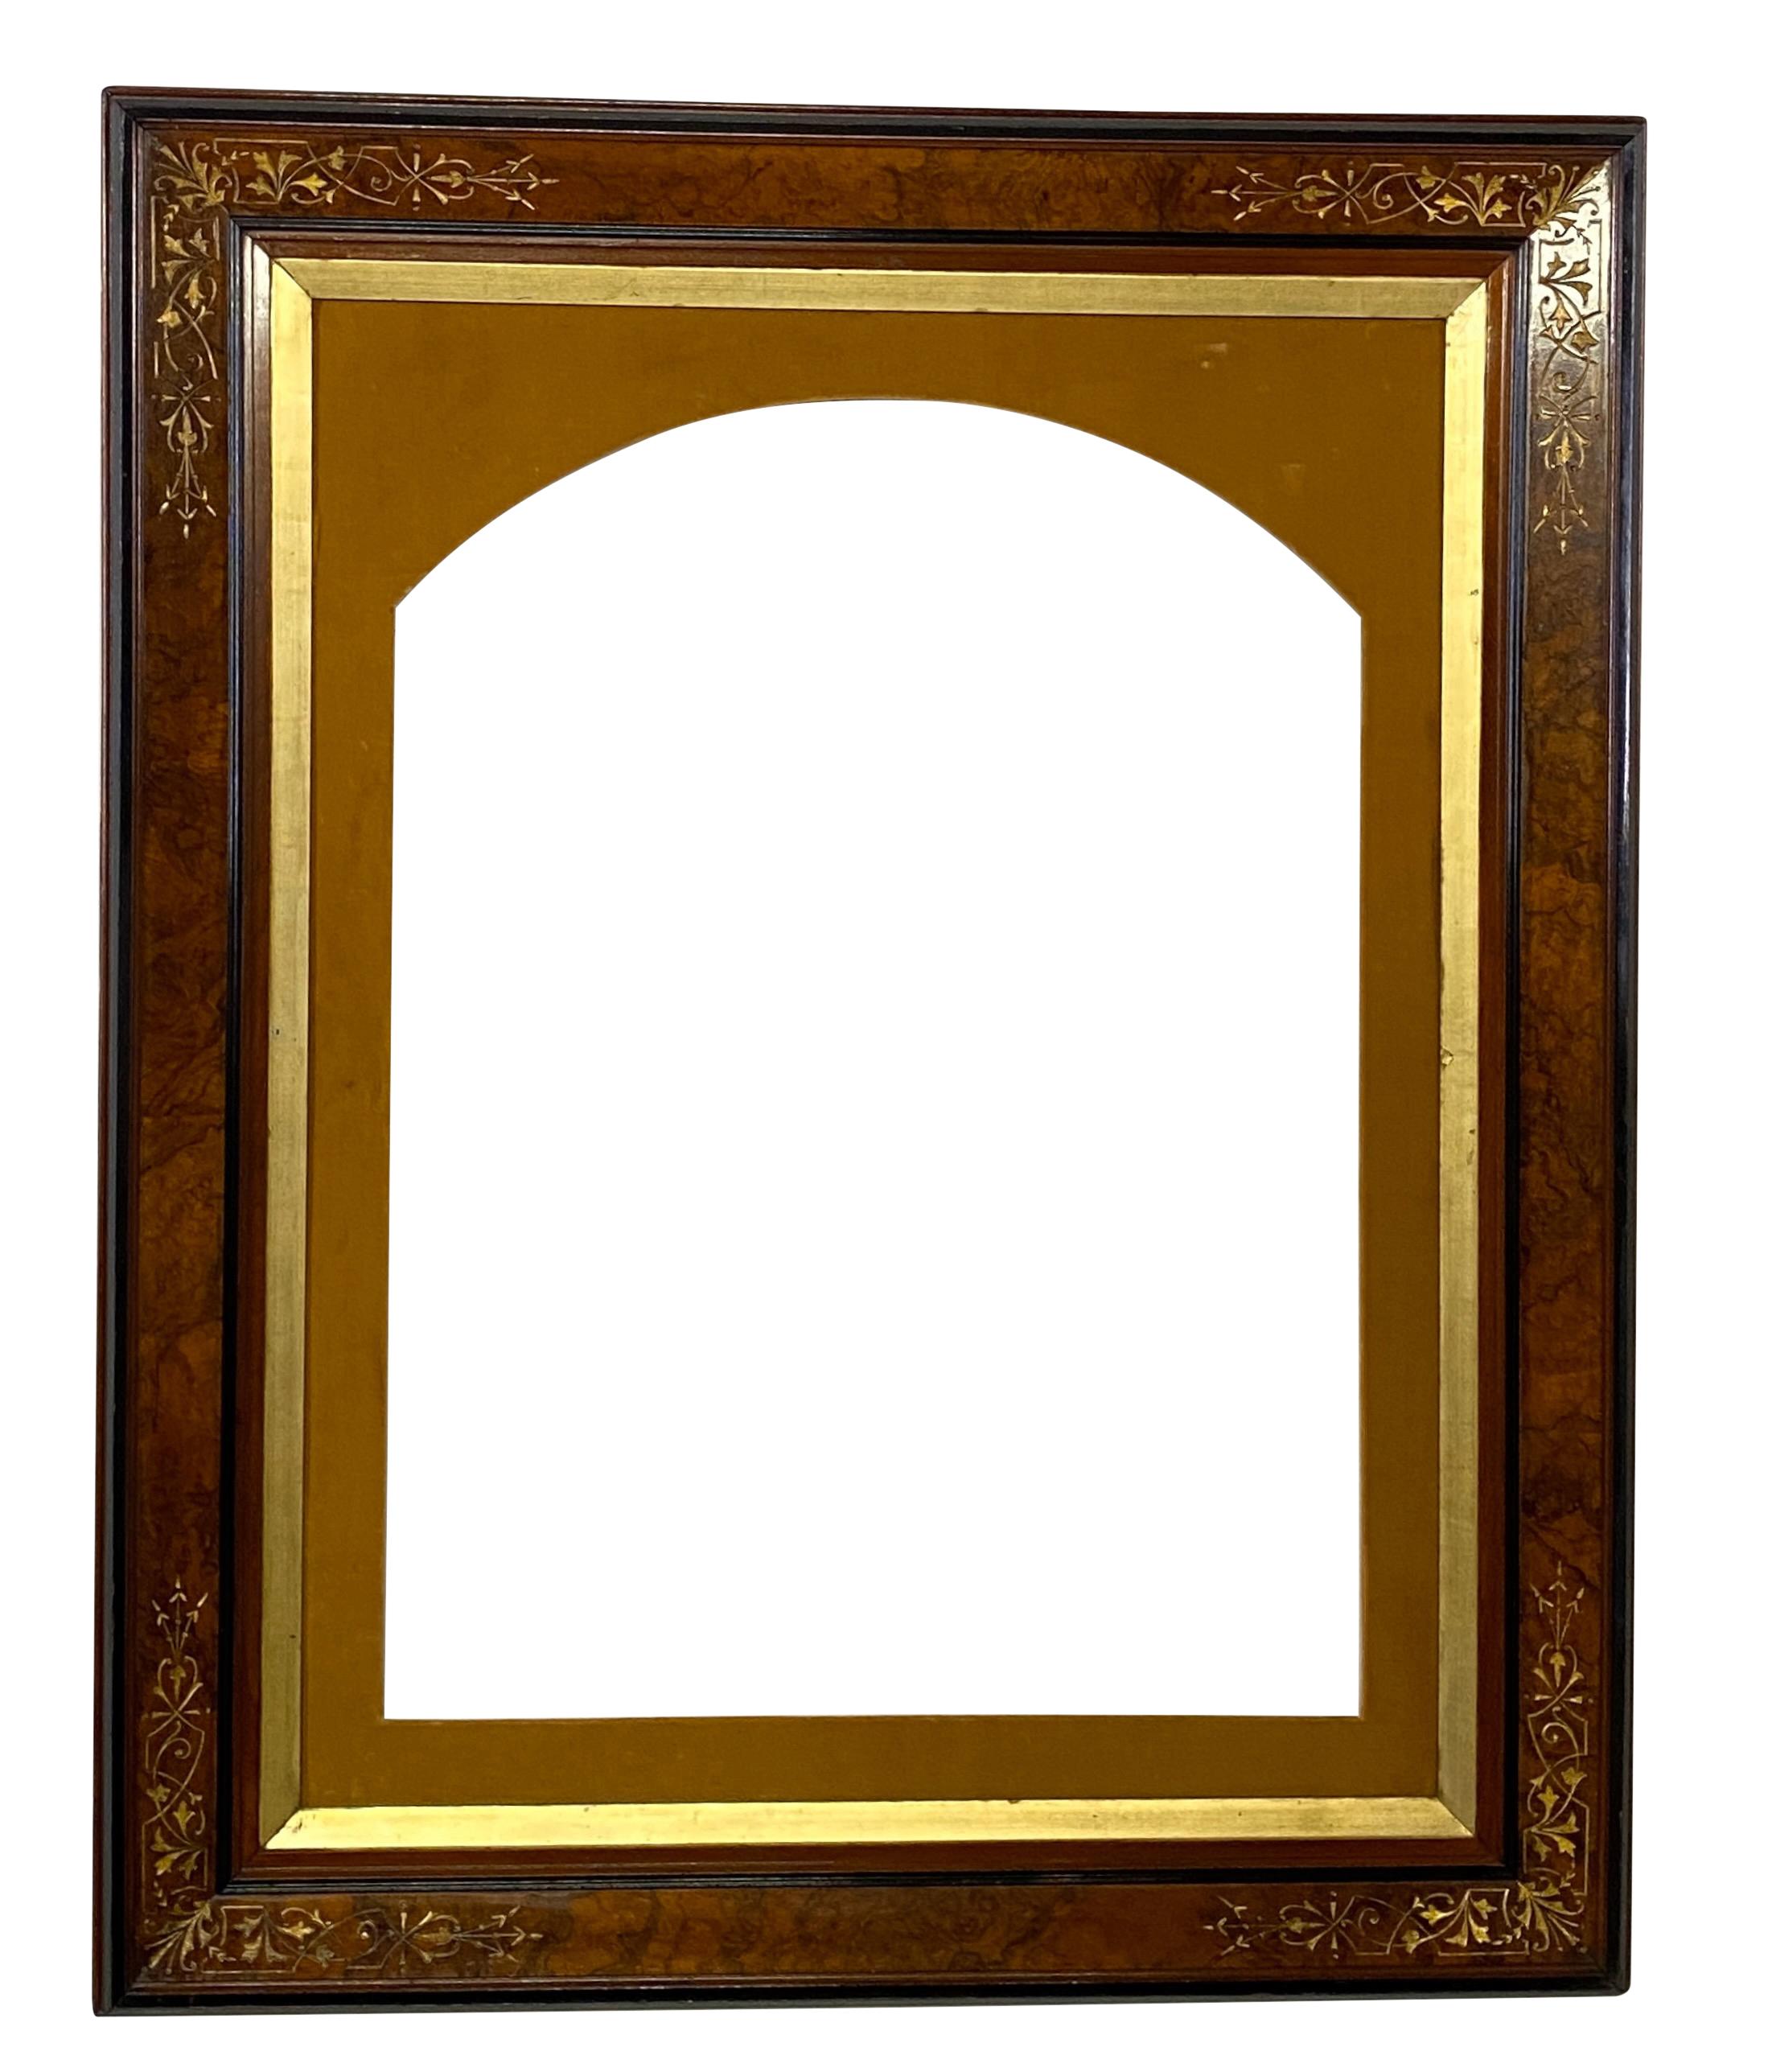 A very large antique Victorian period walnut frame.
Excelent condition.
American, late 19th century.